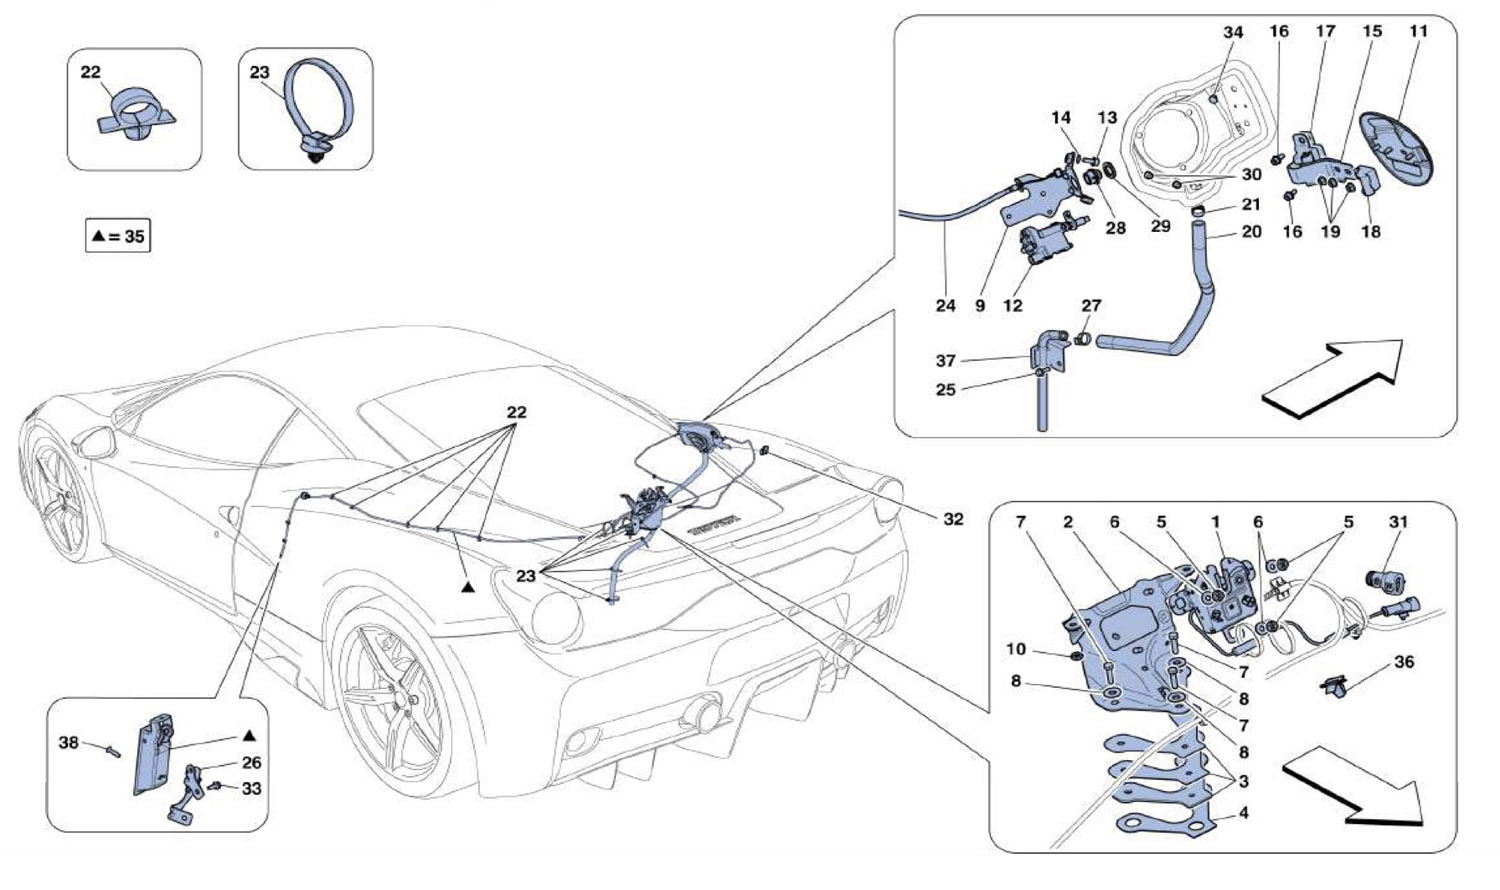 Schematic: Opening Devices For Engine Bonnet And Fuel Cap